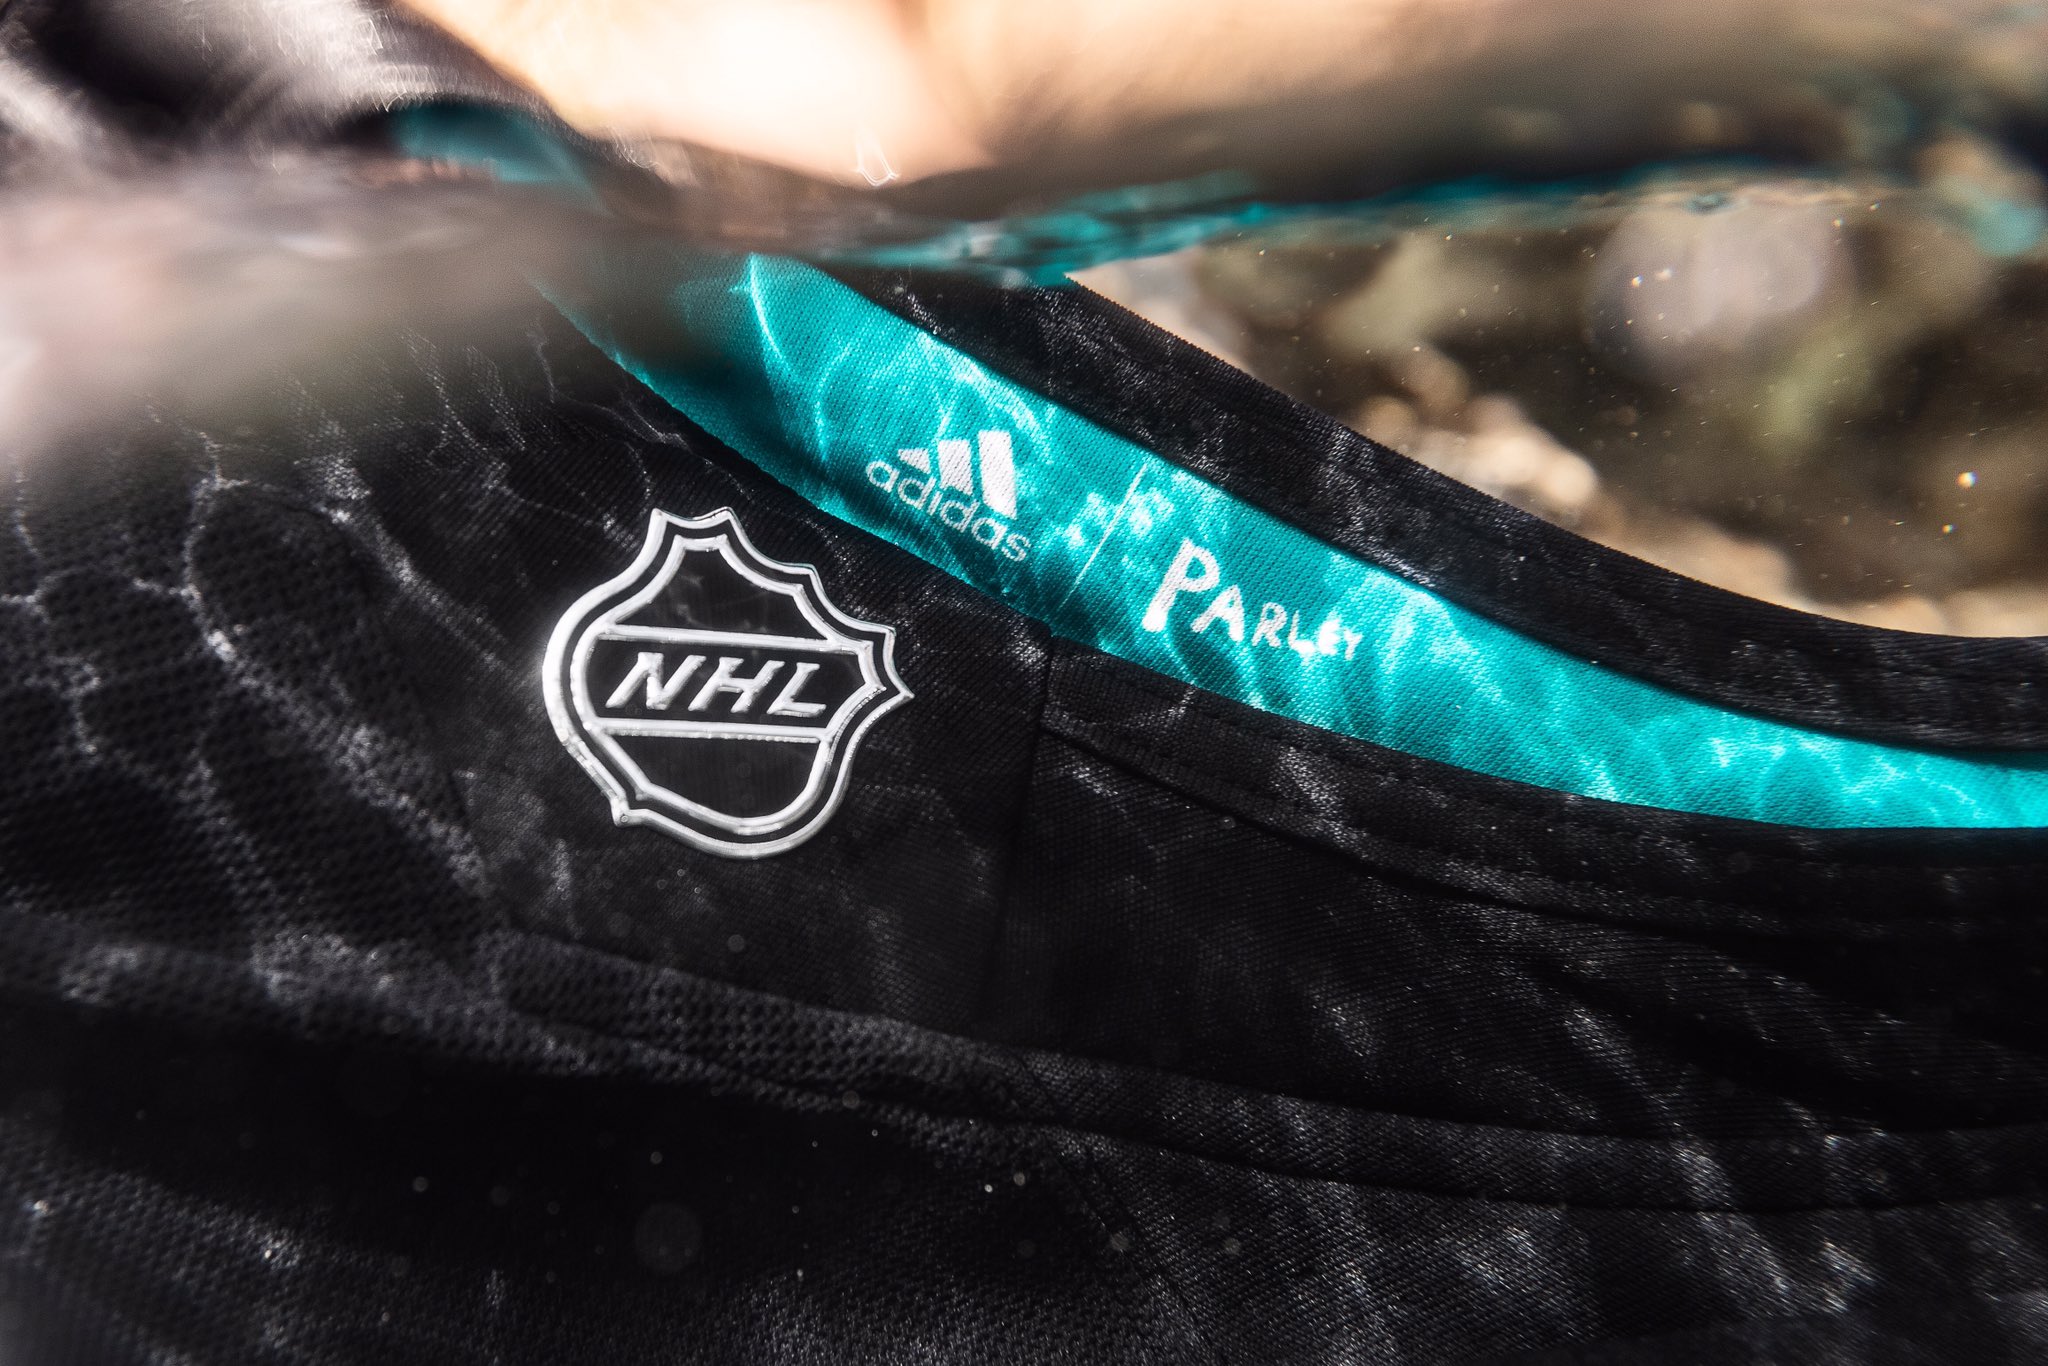 NHL 20 Adds All-New adidas Camo Jerseys - Screenshots Included - Operation  Sports